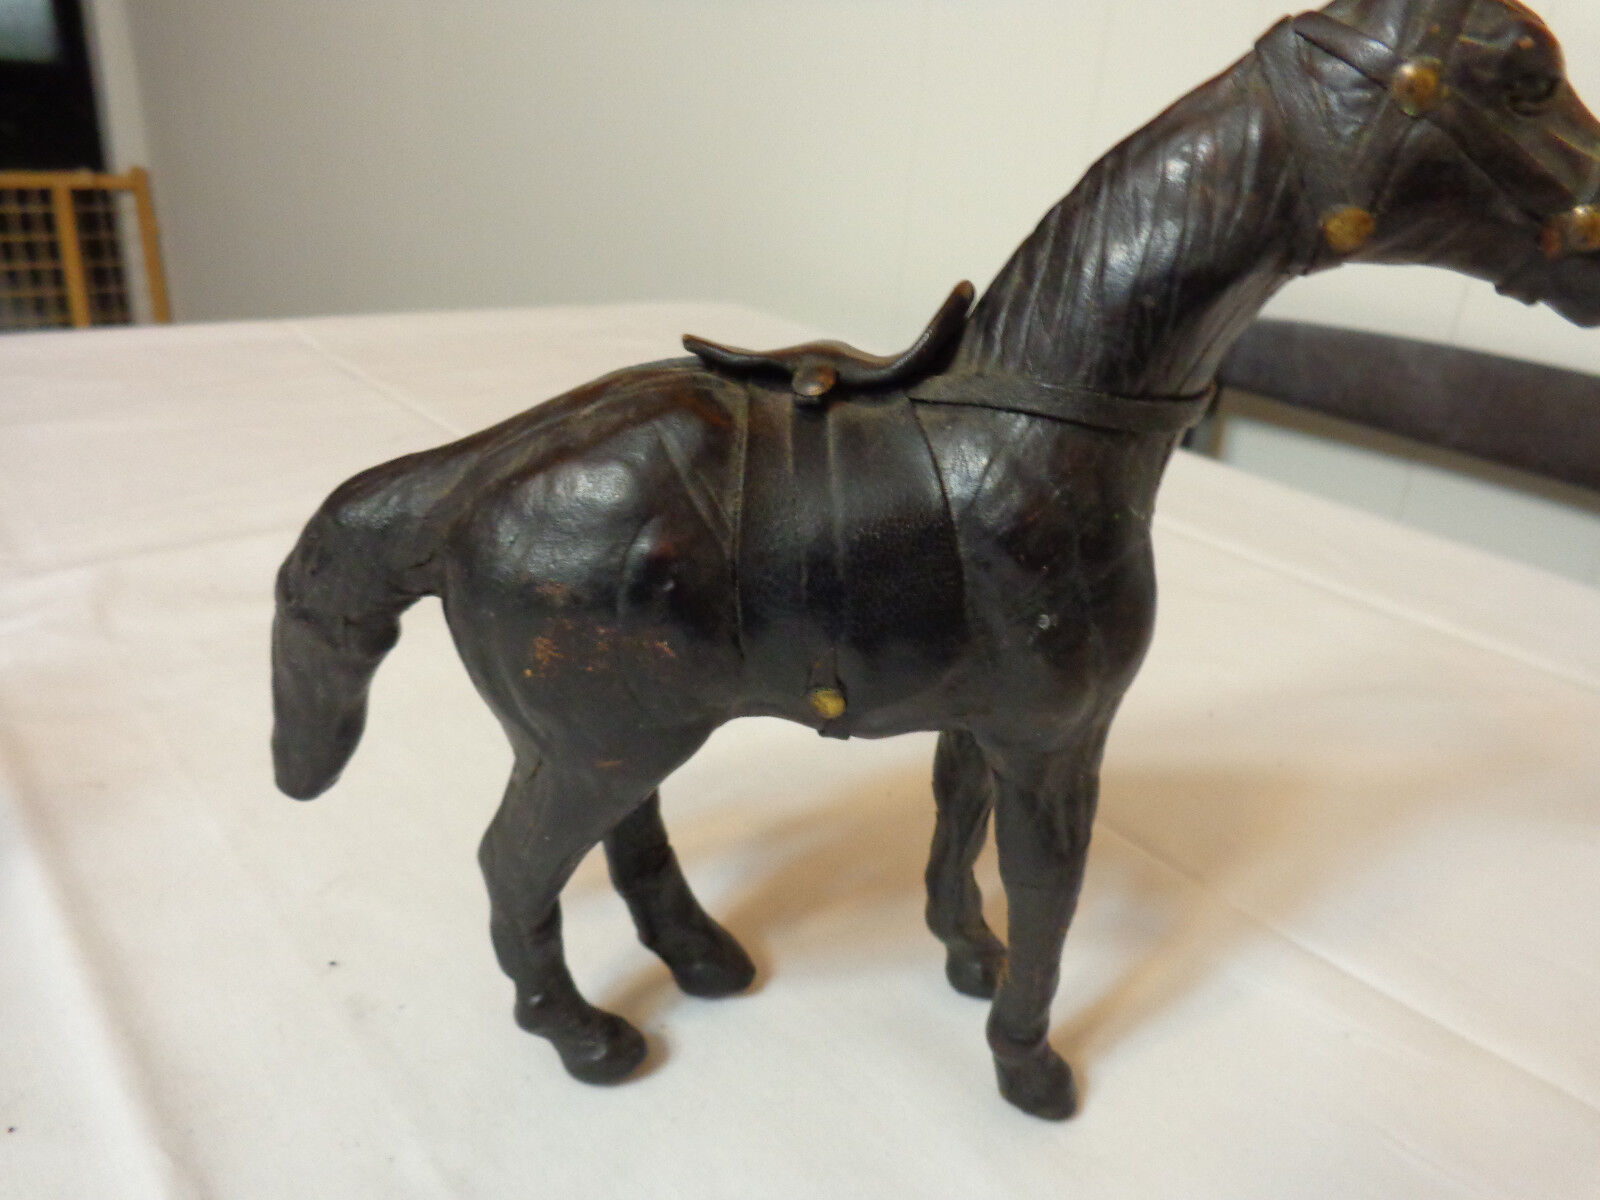 Vintage Leather Wrapped Standing Horse Figurine 7-8 Inches Tall Без бренда - фотография #6